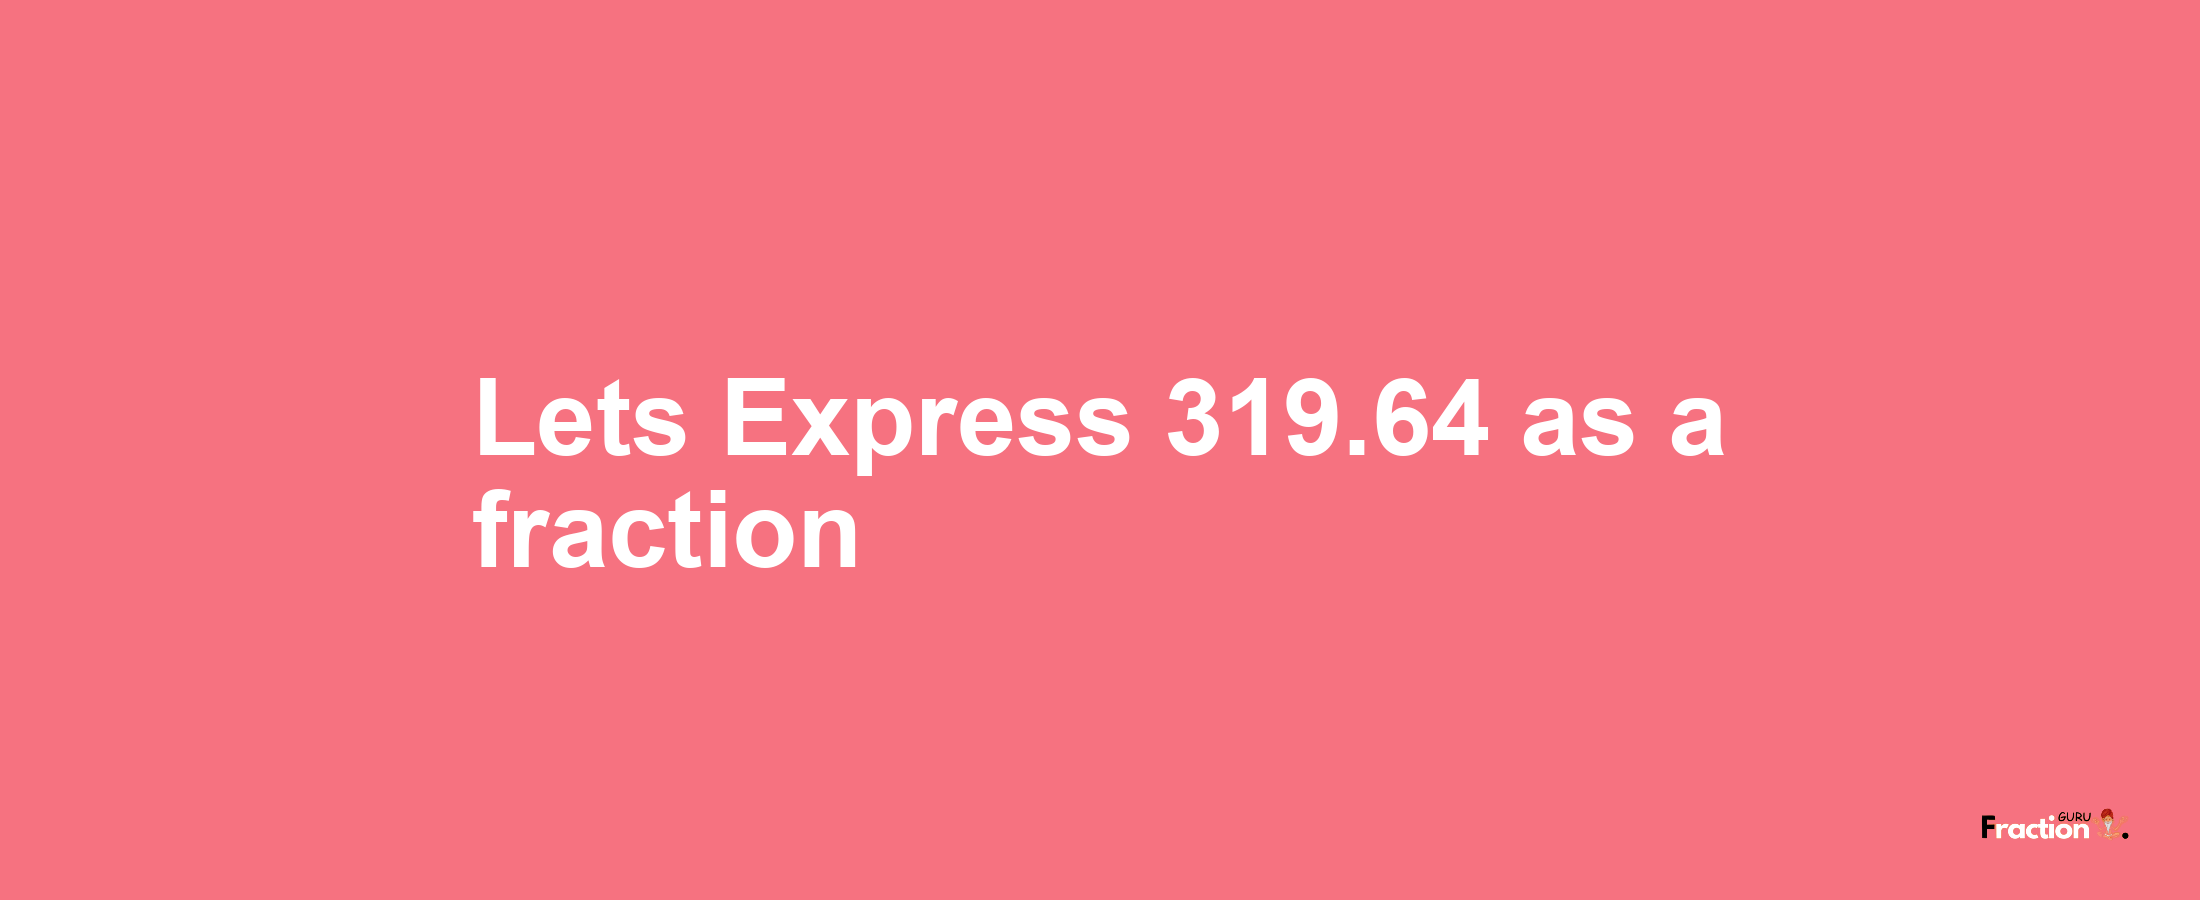 Lets Express 319.64 as afraction